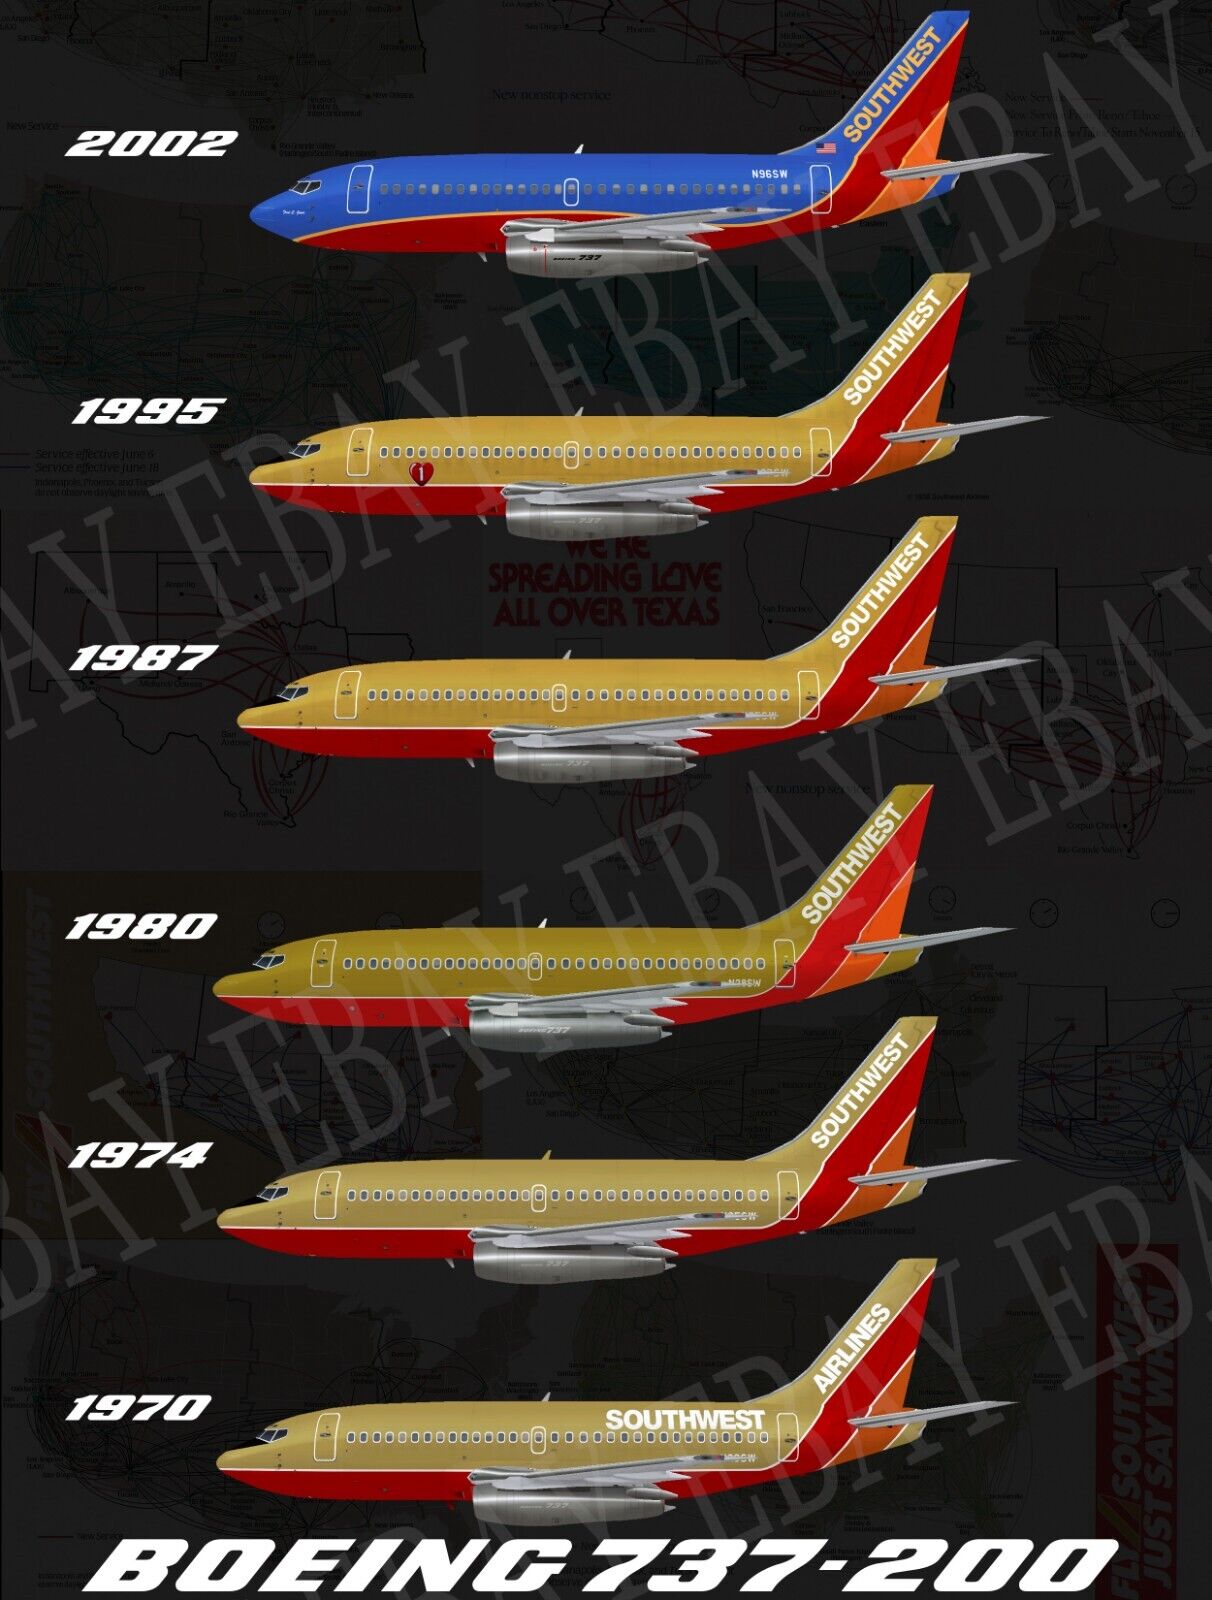 Southwest Airlines 737-200 Livery History Retro 8 X 10